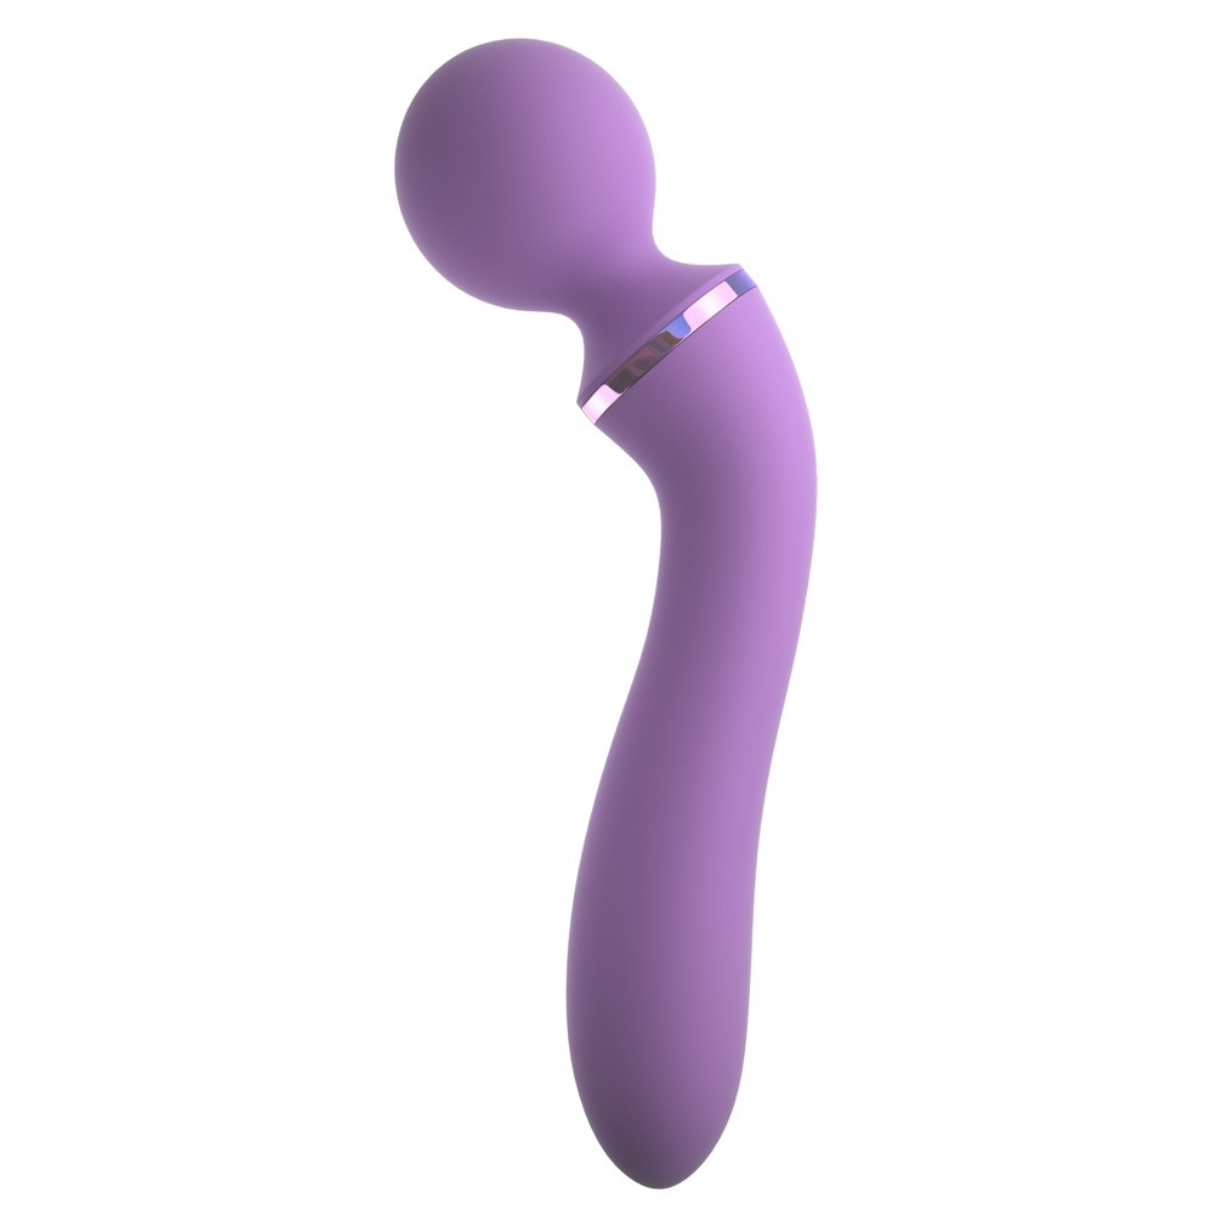 FANTASY FOR HER Duo Wand Massage-Her Vibrator